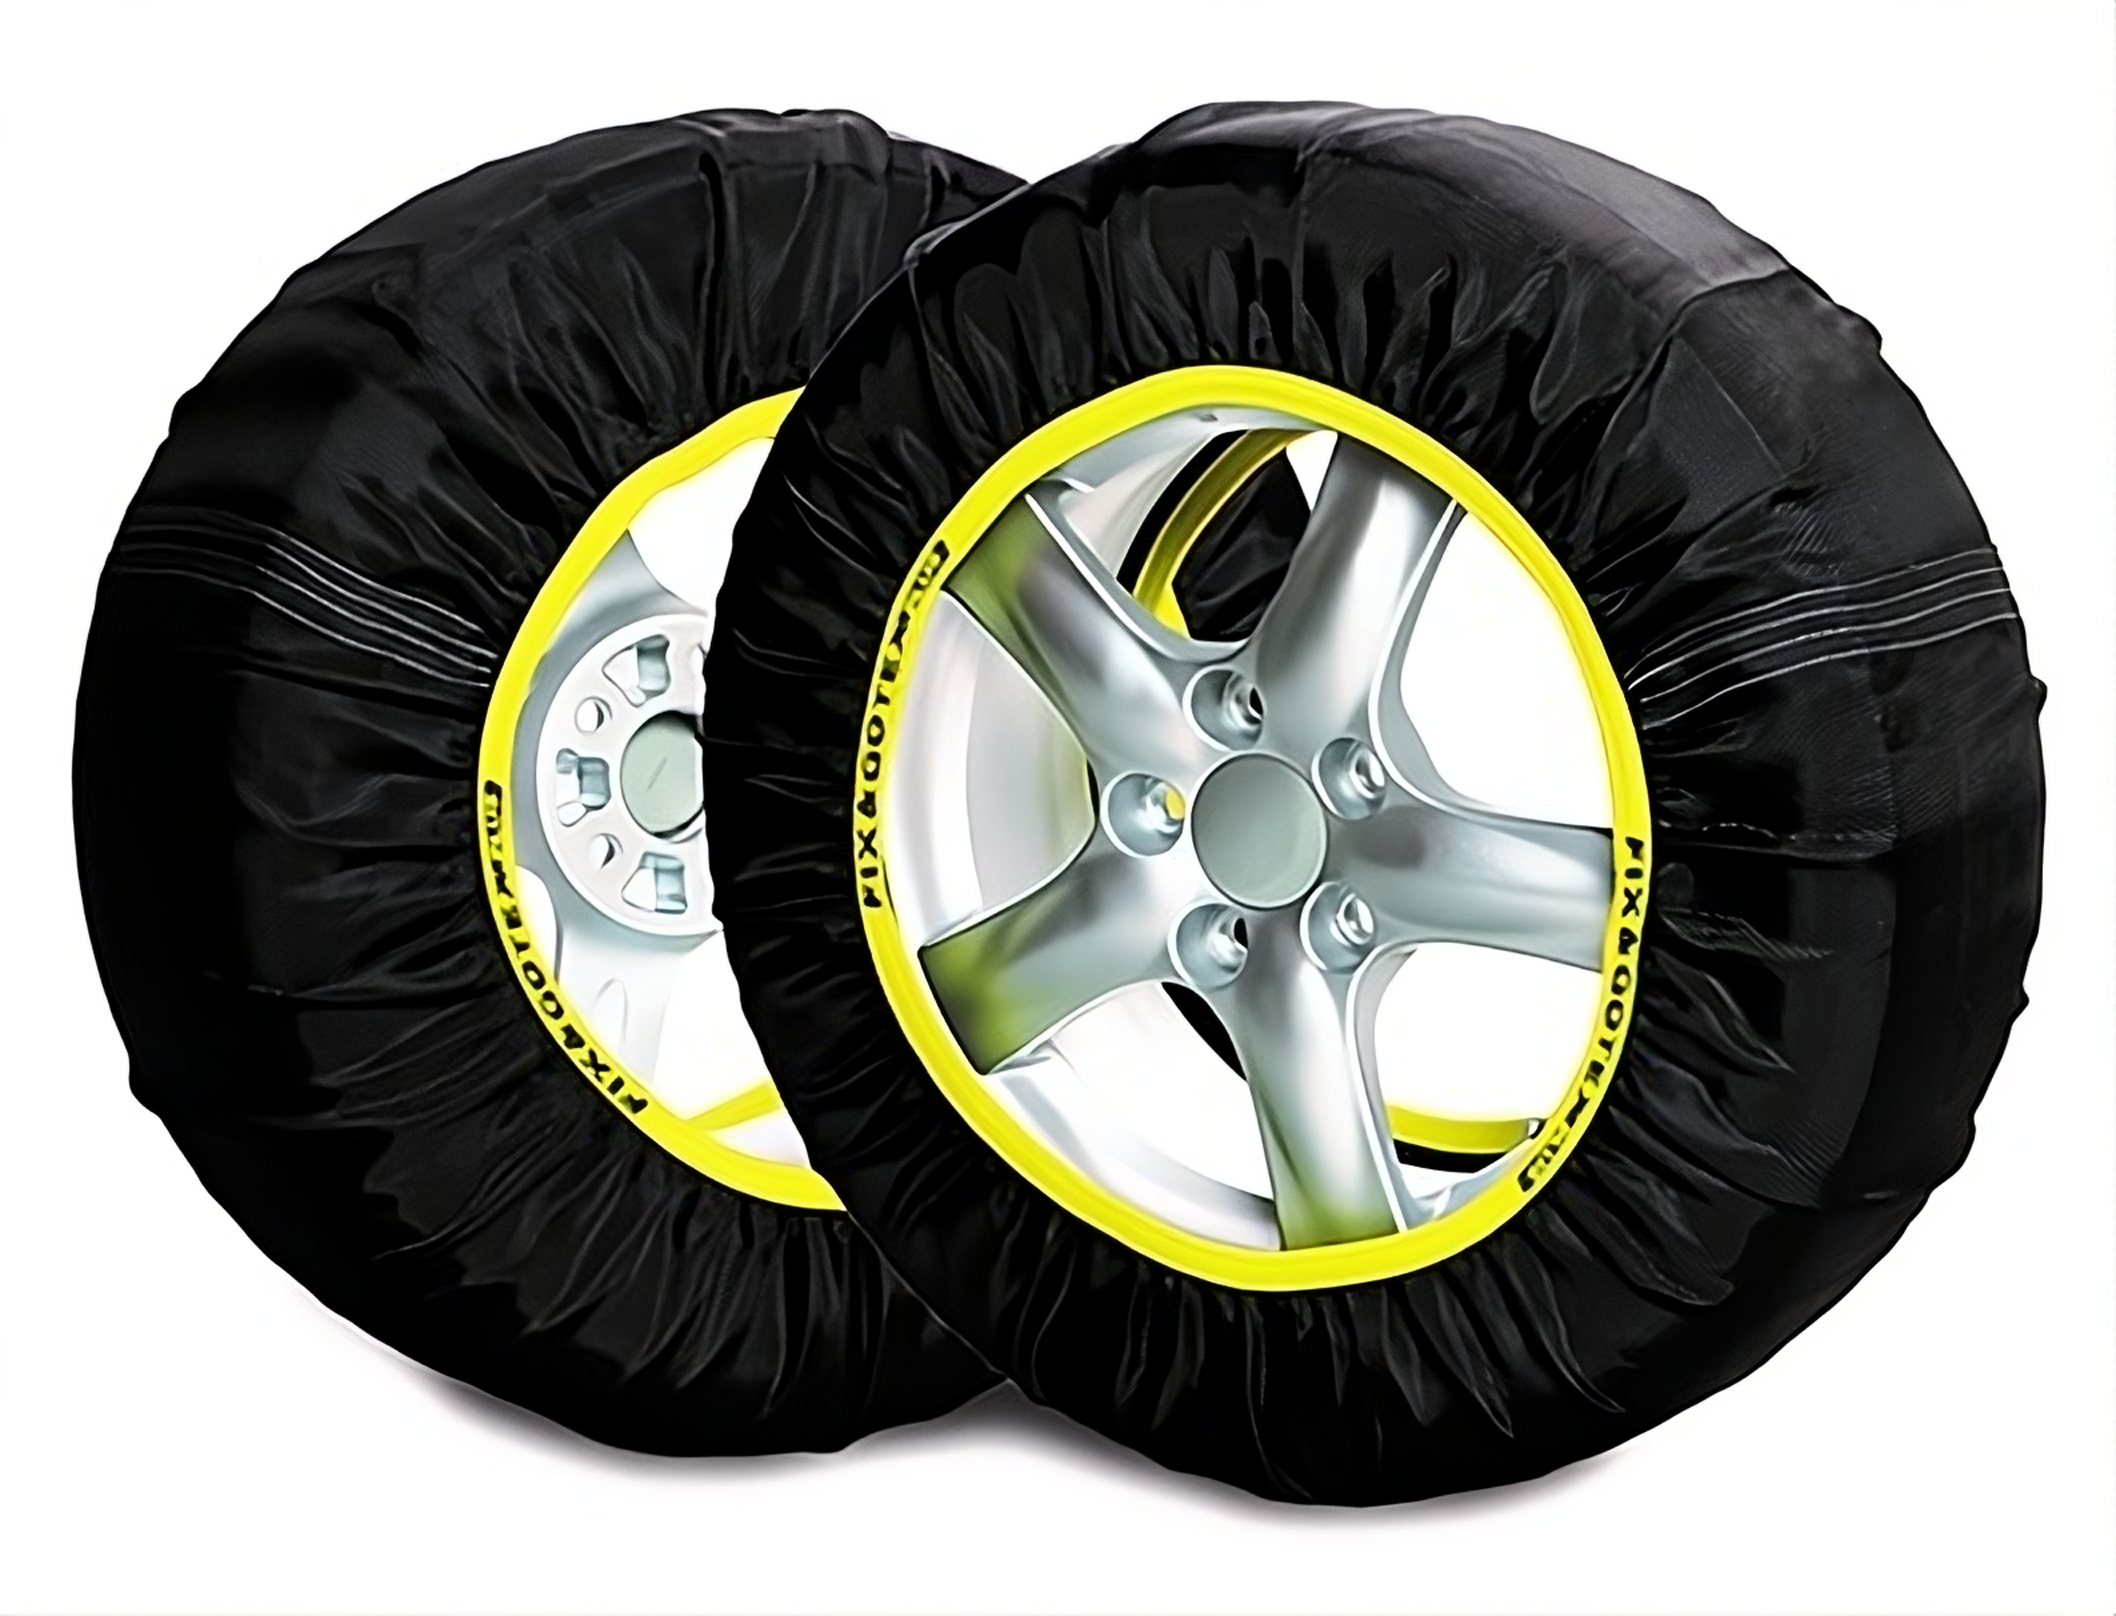 195 - 195/55R20 - Pro Chaines Neige